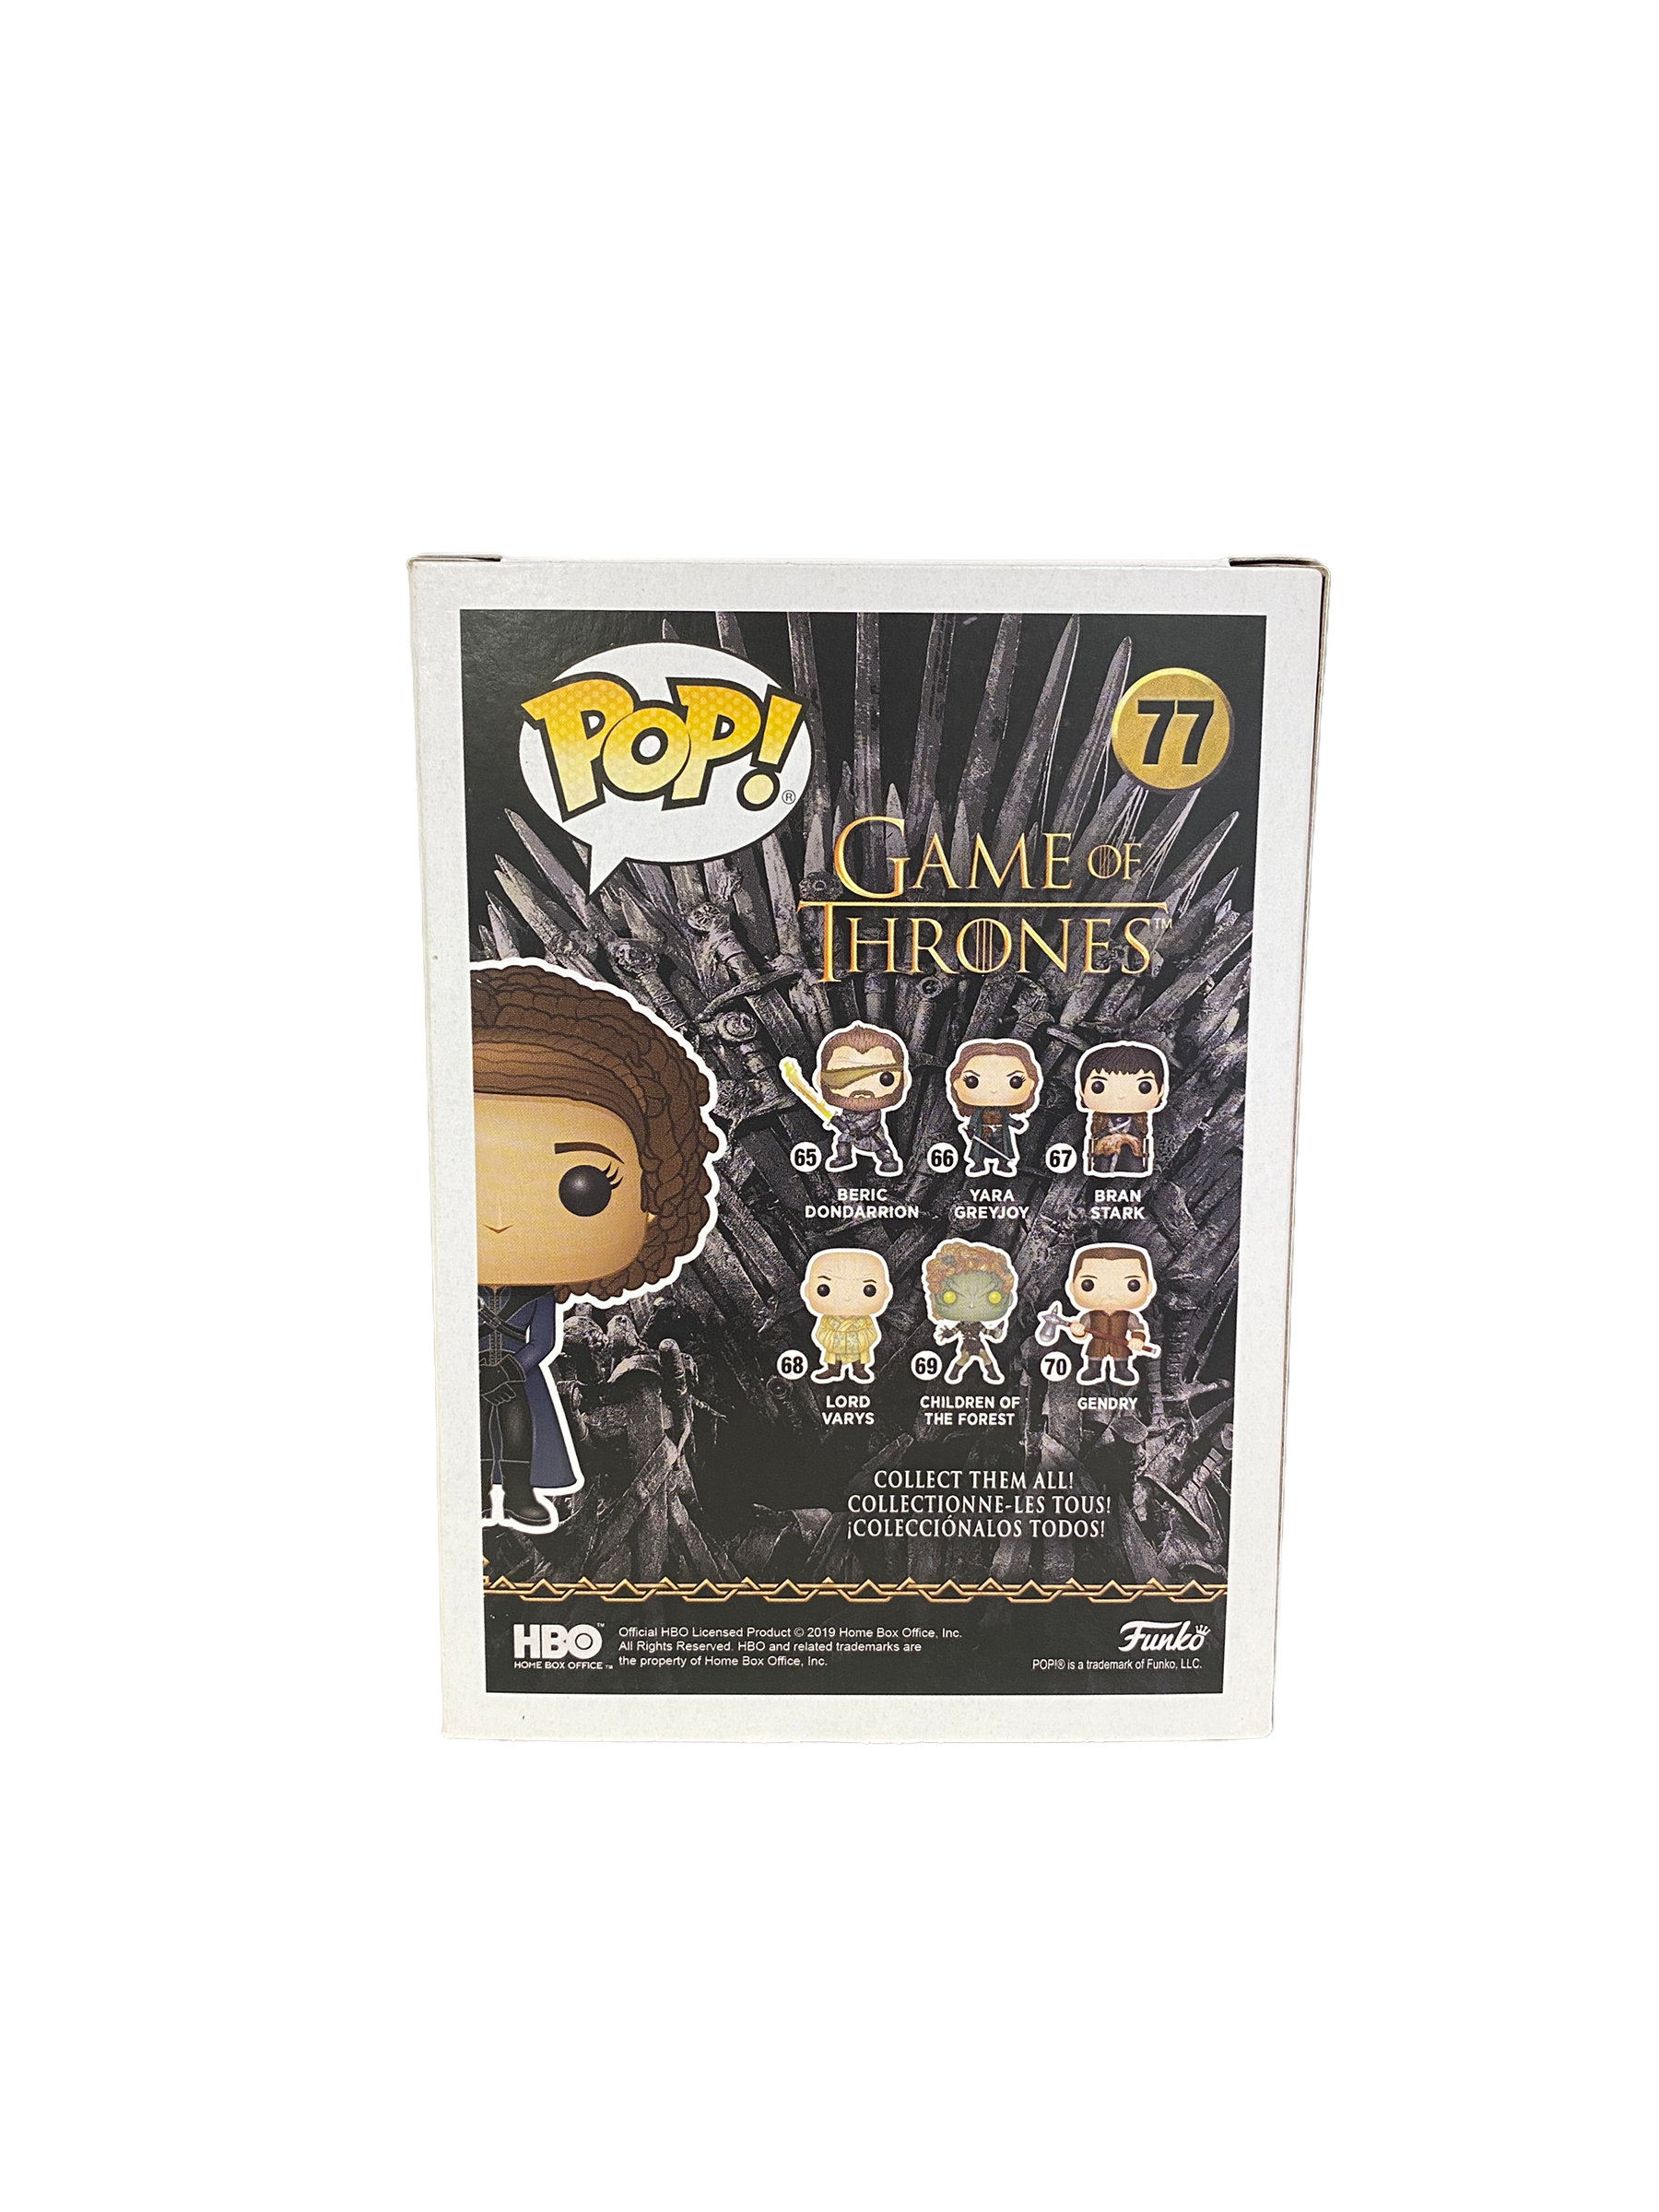 Missandei #77 Funko Pop! - Game Of Thrones - NYCC 2019 Official Convention Exclusive - Condition 9/10